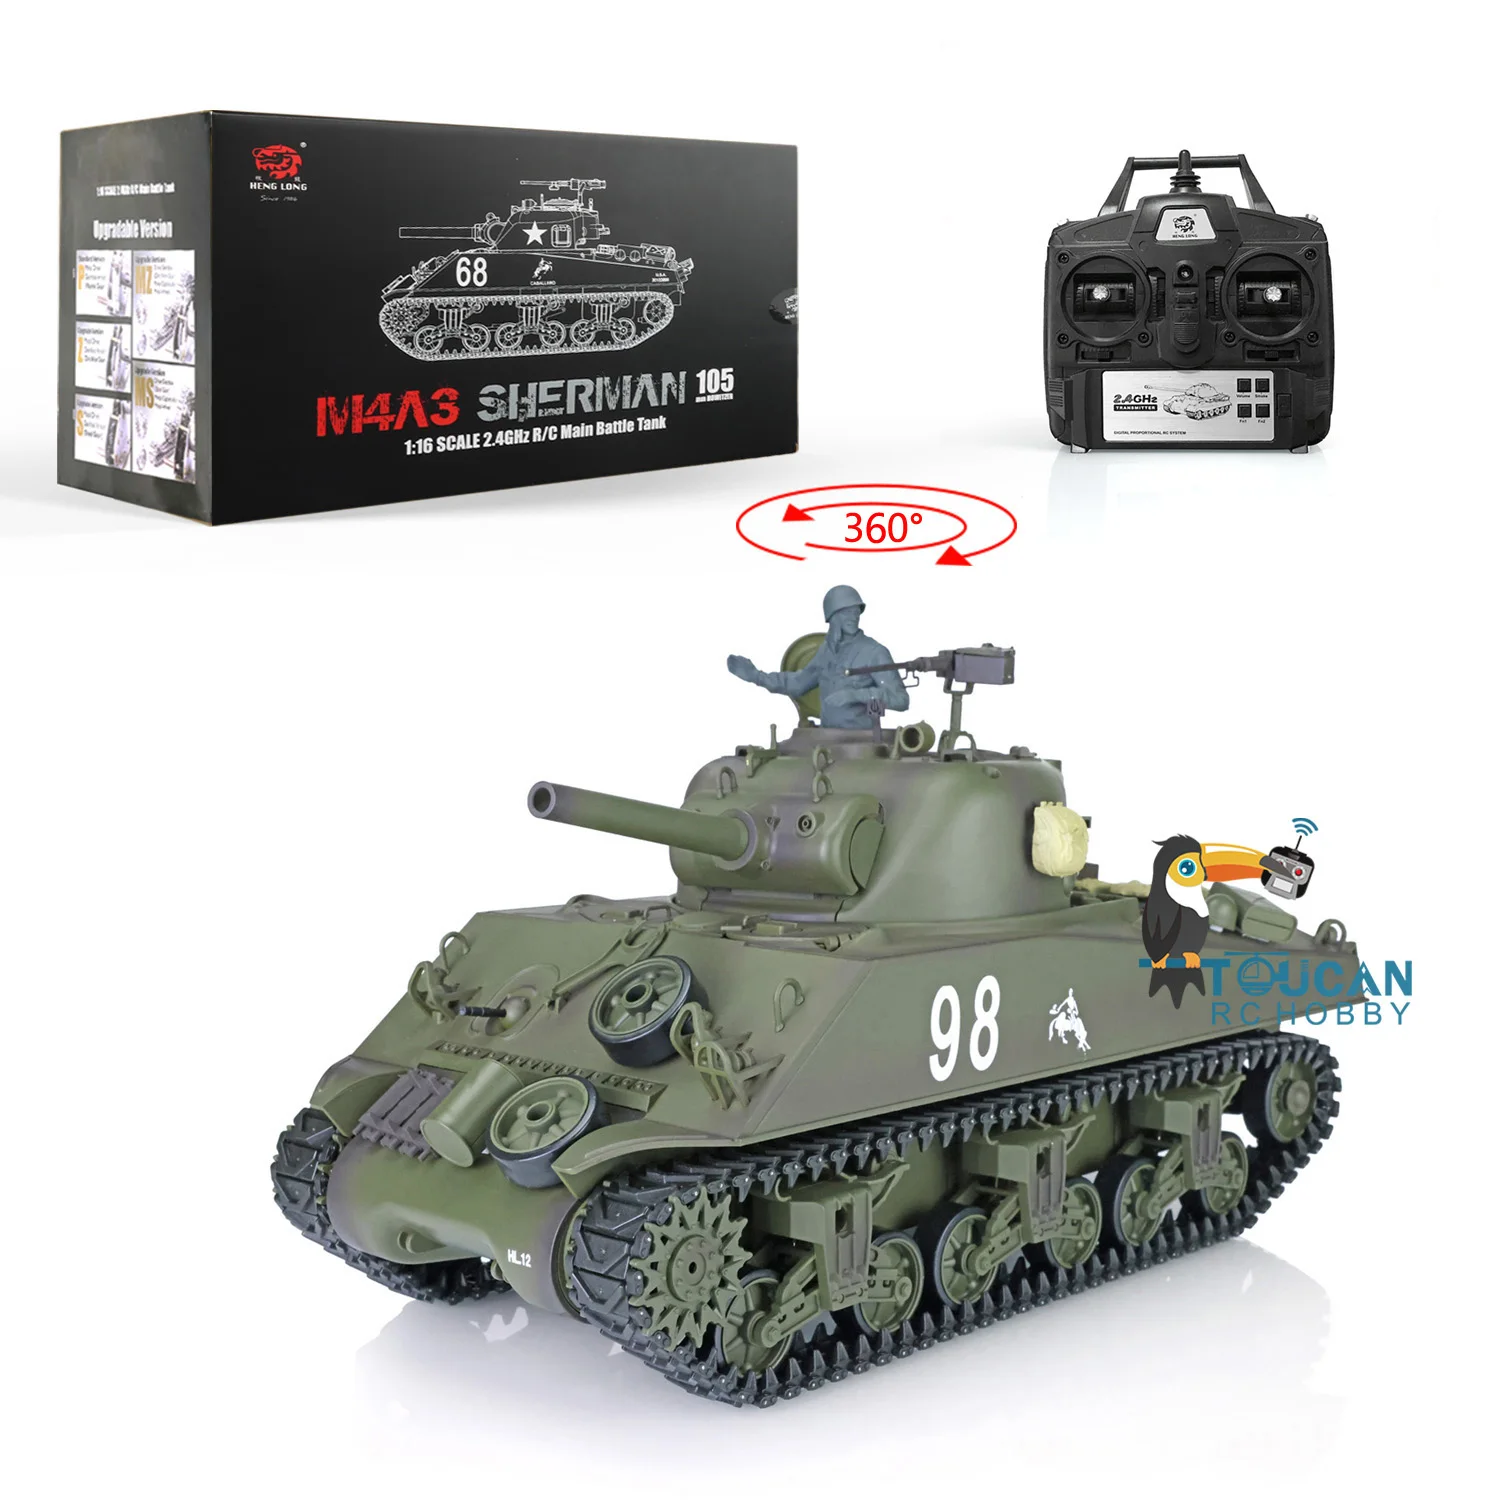 

2.4G Henglong 1/16 Scale 7.0 Plastic M4A3 Sherman RC Tank 3898 360 Turret Rotating Infrared Battle TH17667-SMT7